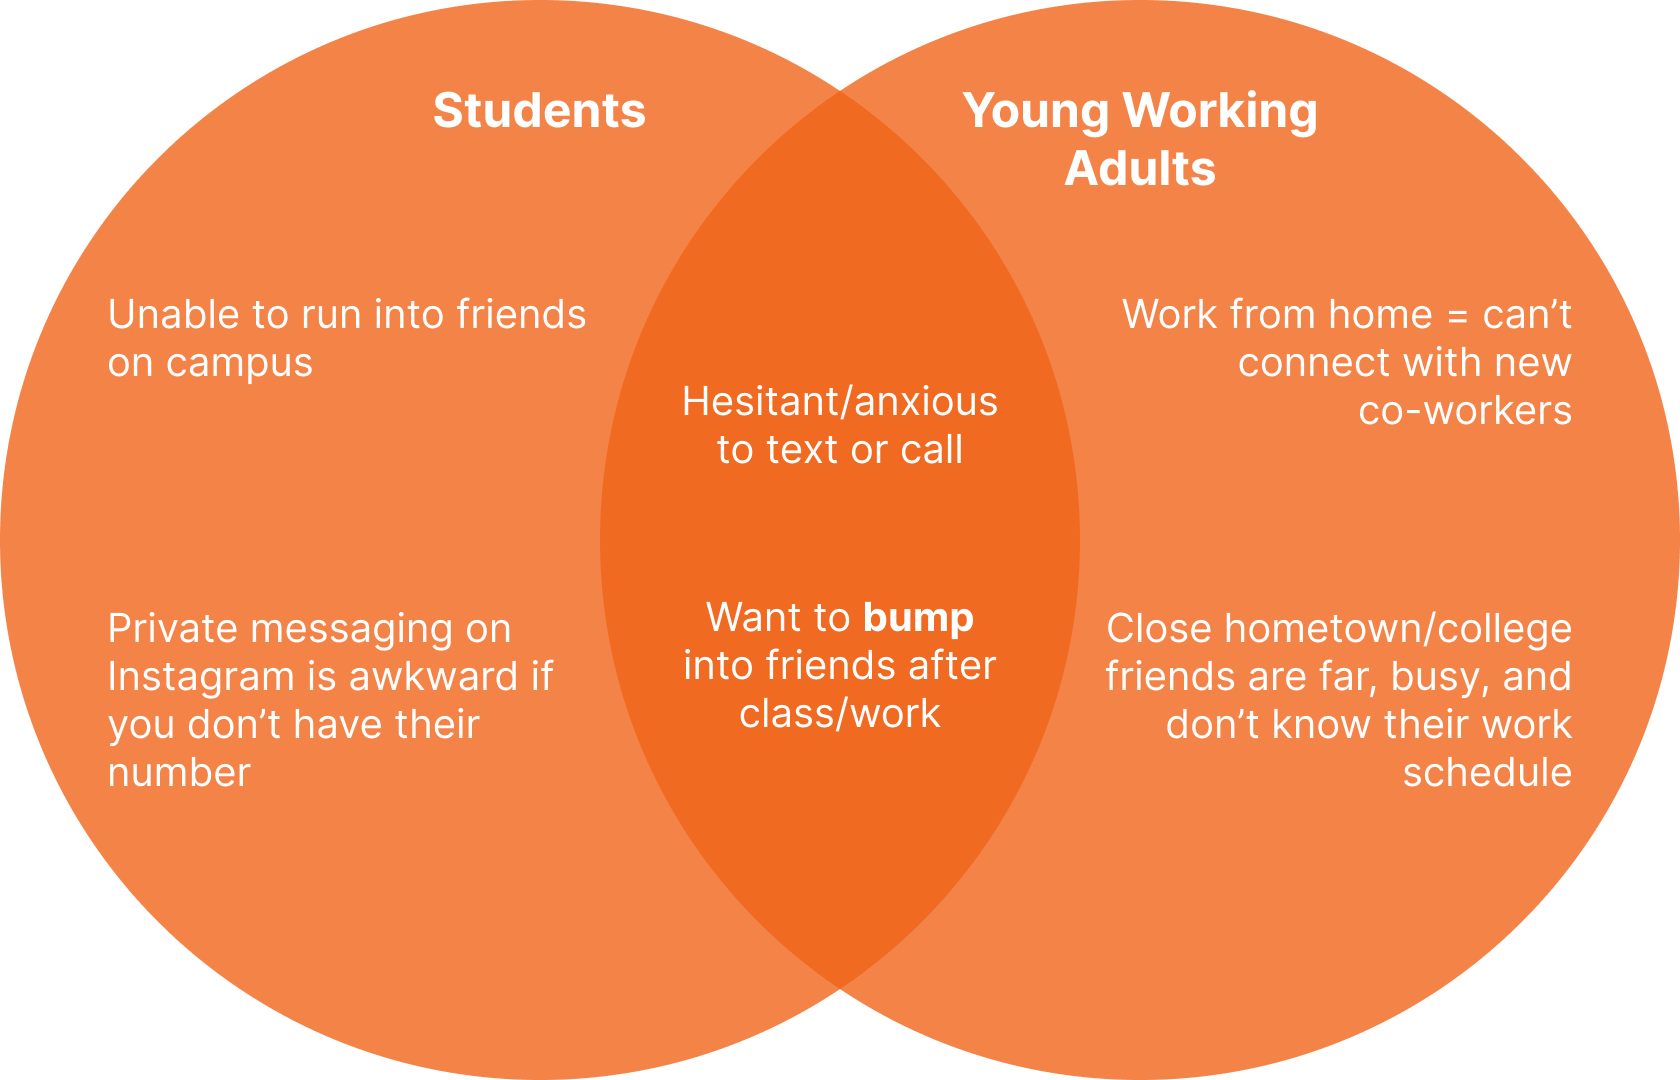 Venn diagram comparing similarities and differences between students' and young working adults' social life amidst COVID